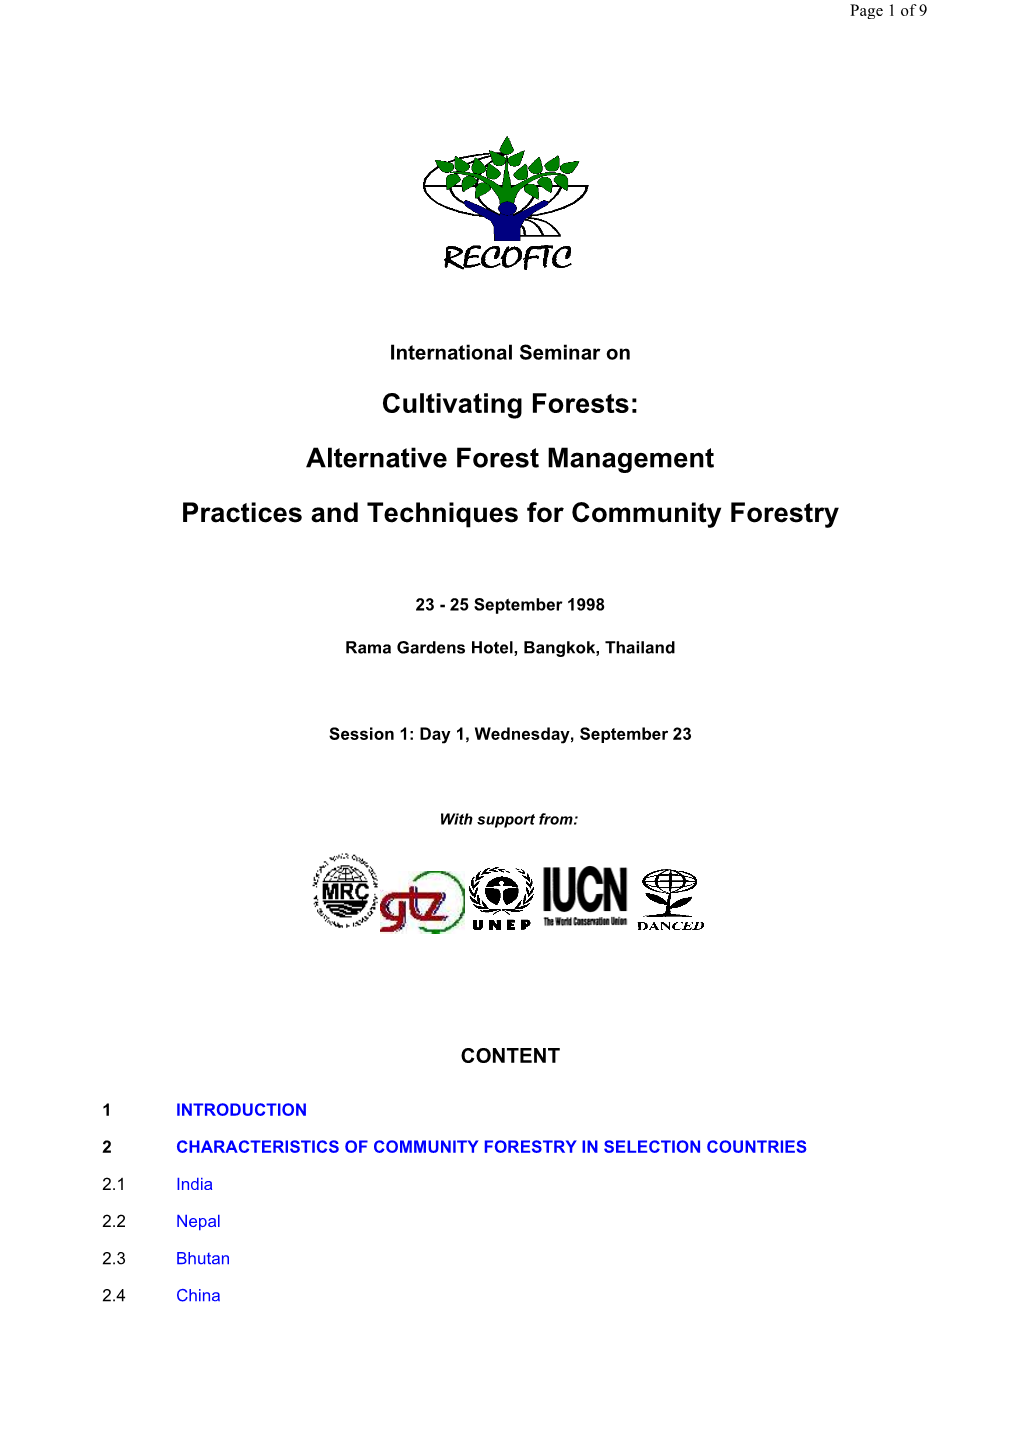 Cultivating Forests: Alternative Forest Management Practices and Techniques for Community Forestry